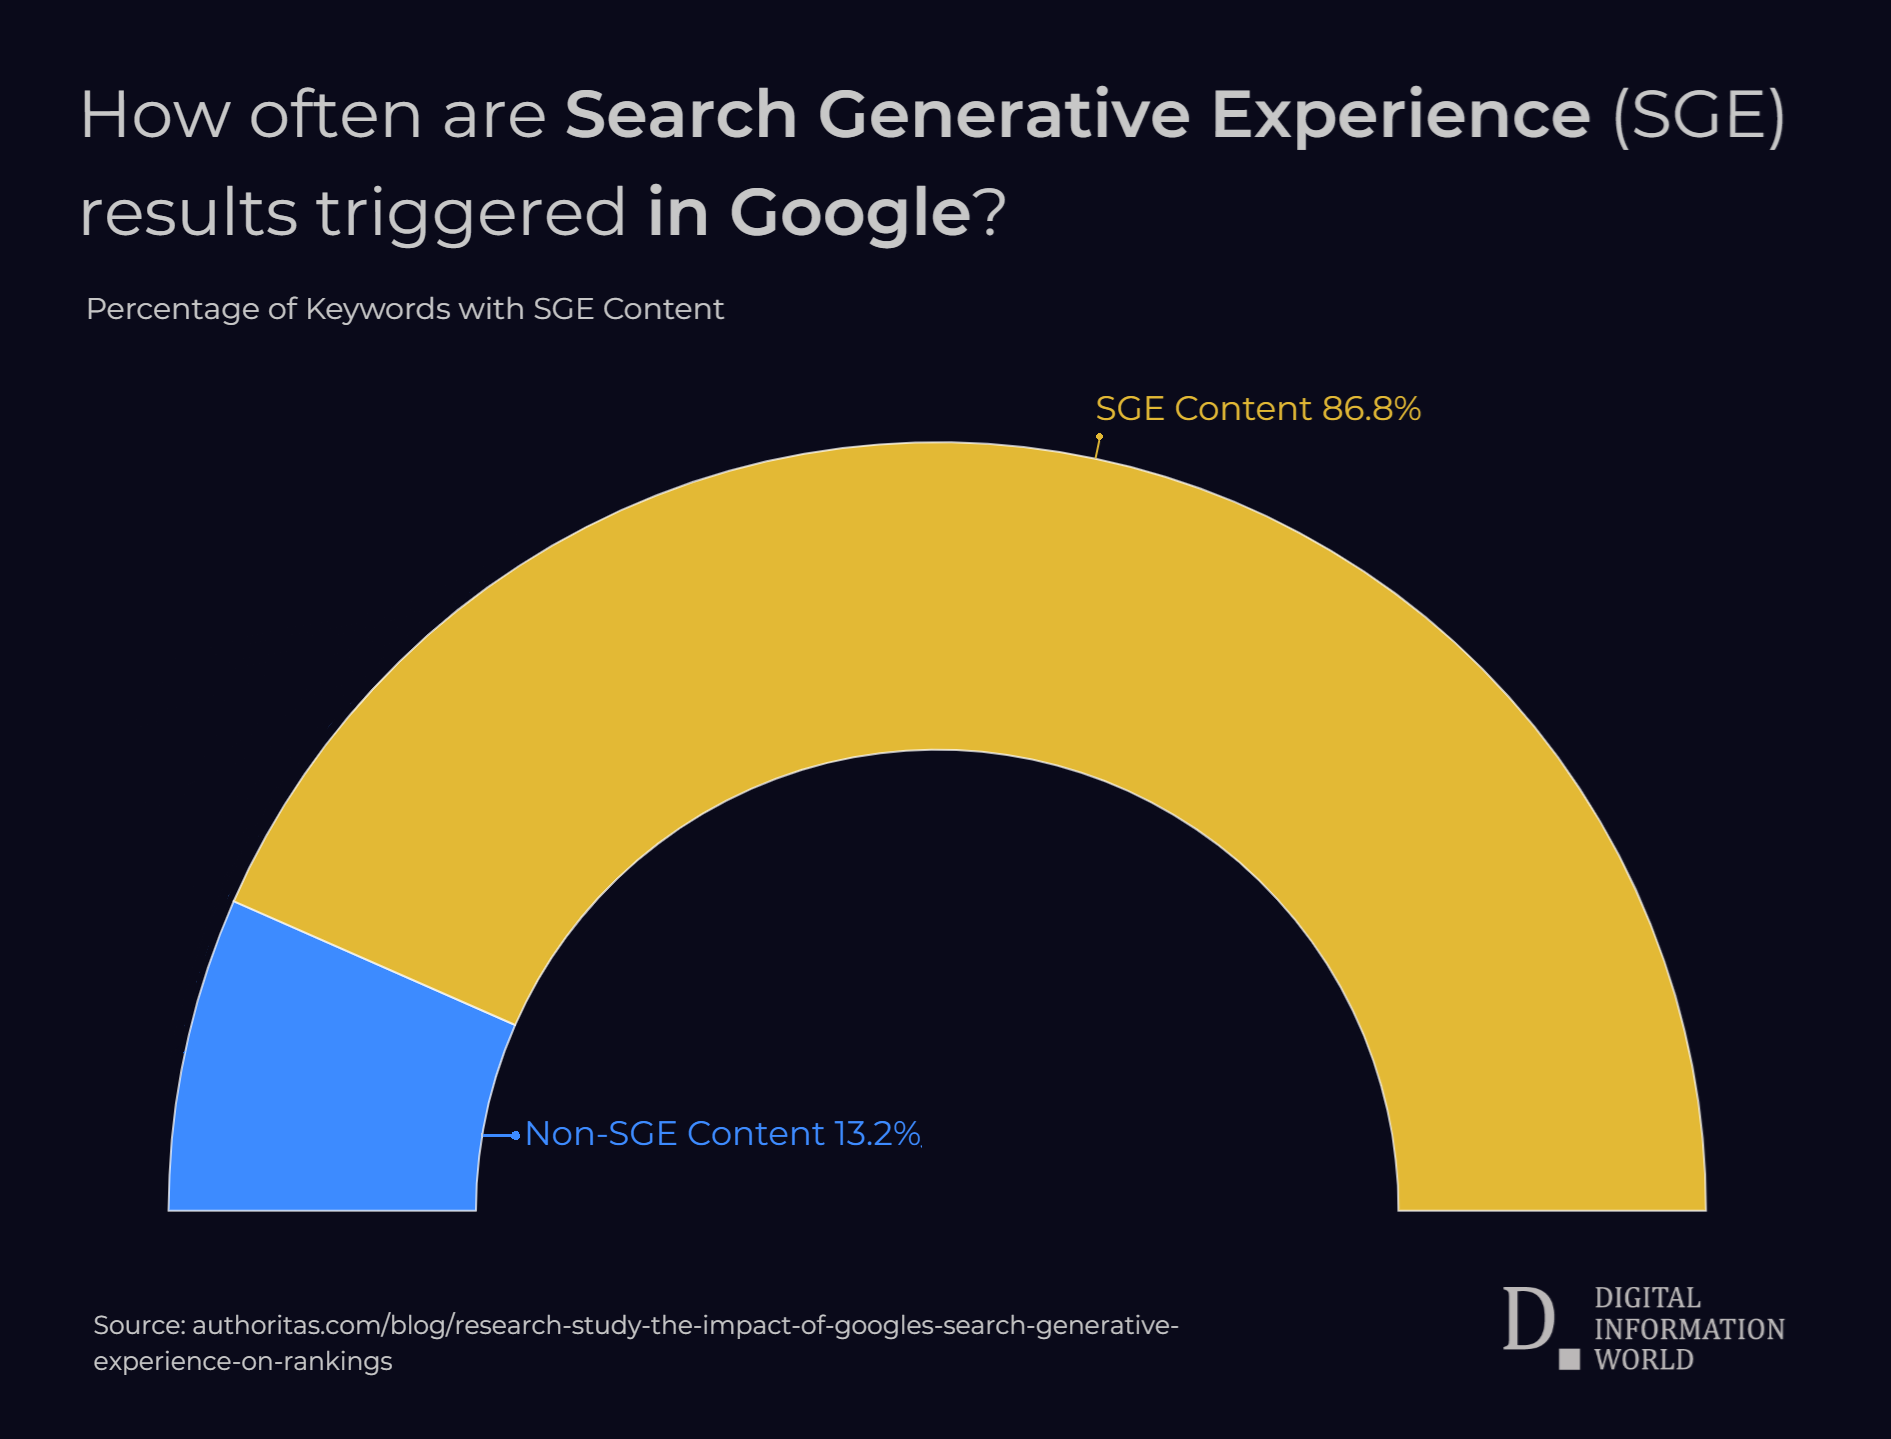 Google displays a Search Generative element for 86.8% of all search queries.